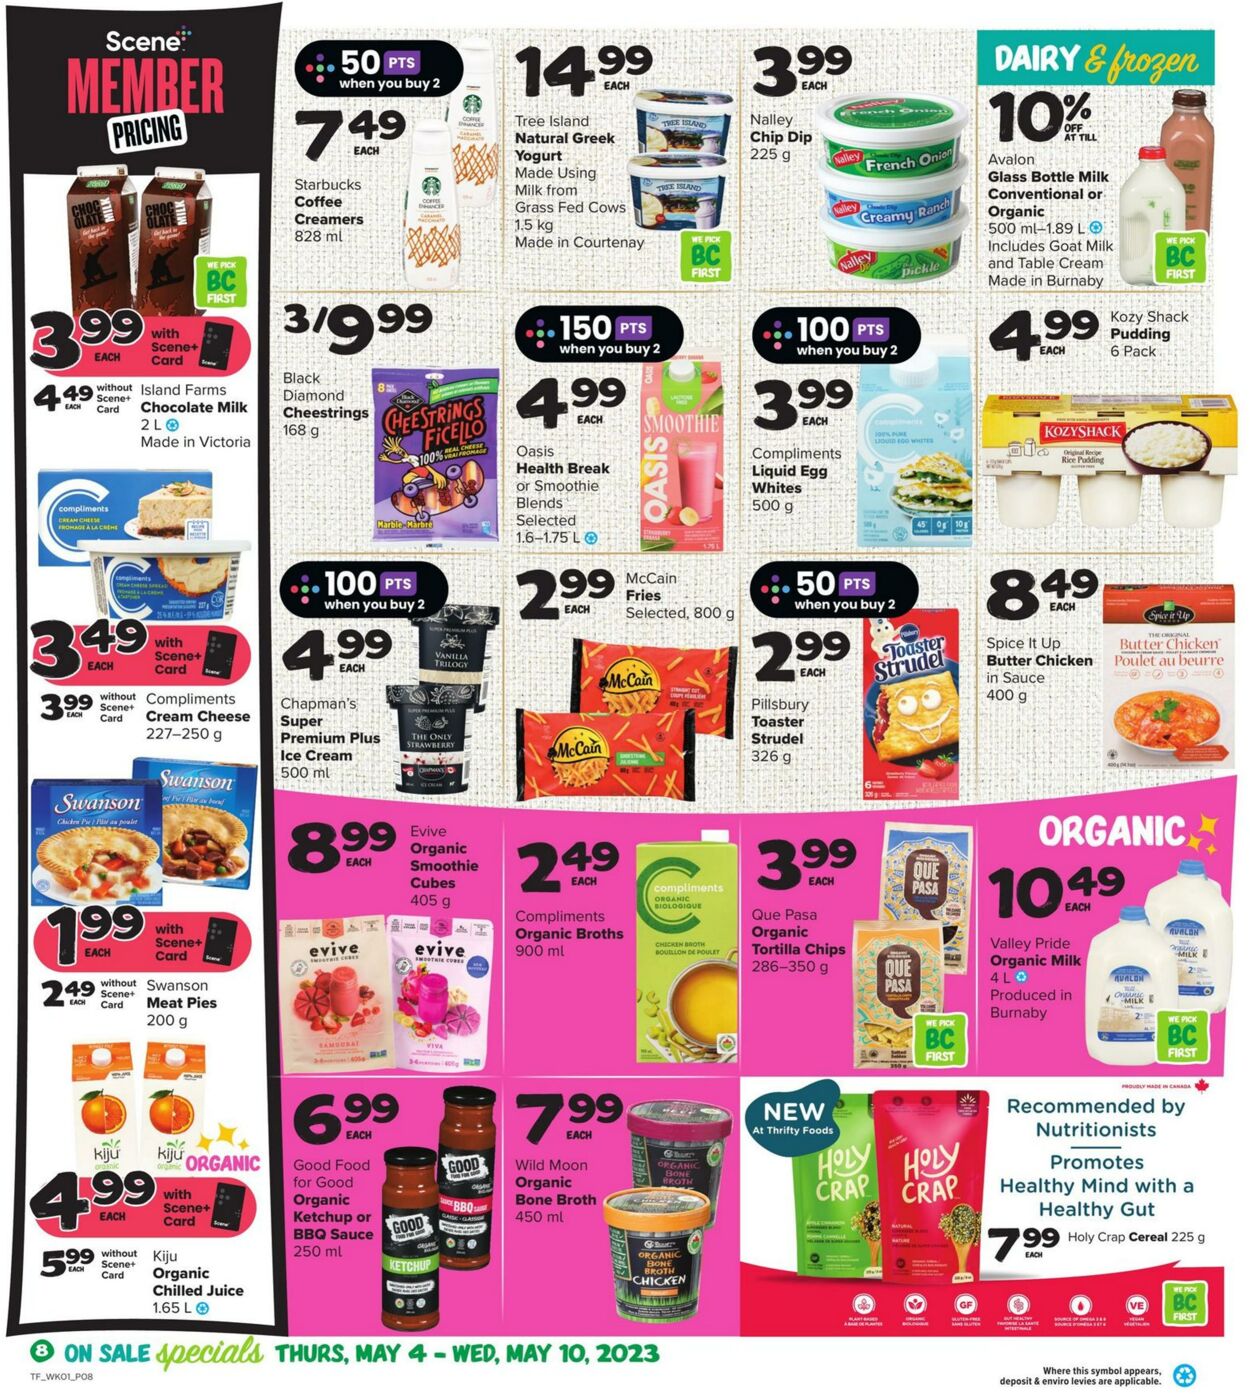 Flyer Thrifty Foods 04.05.2023 - 10.05.2023